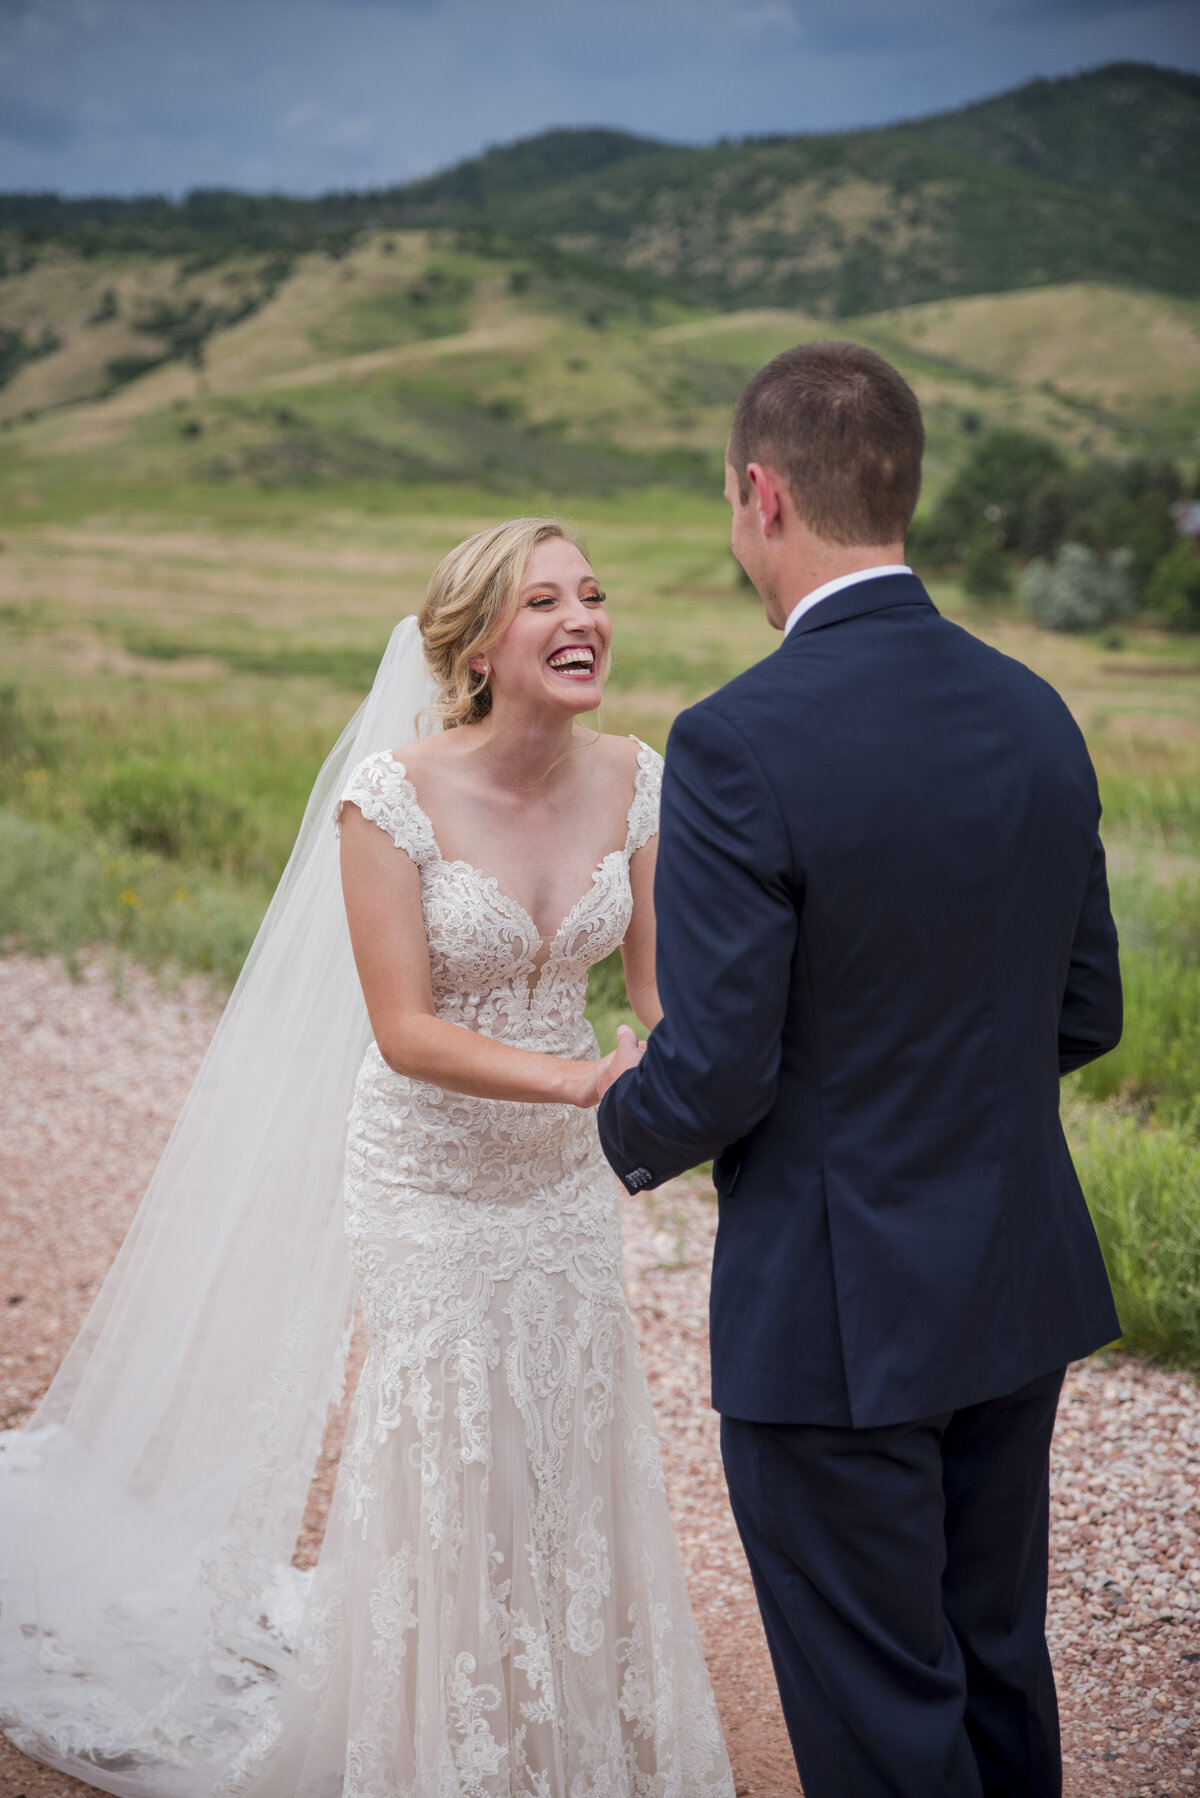 A bride joyfully laughs as she sees her groom during their first look at The Manor House in Littleton, Colorado.